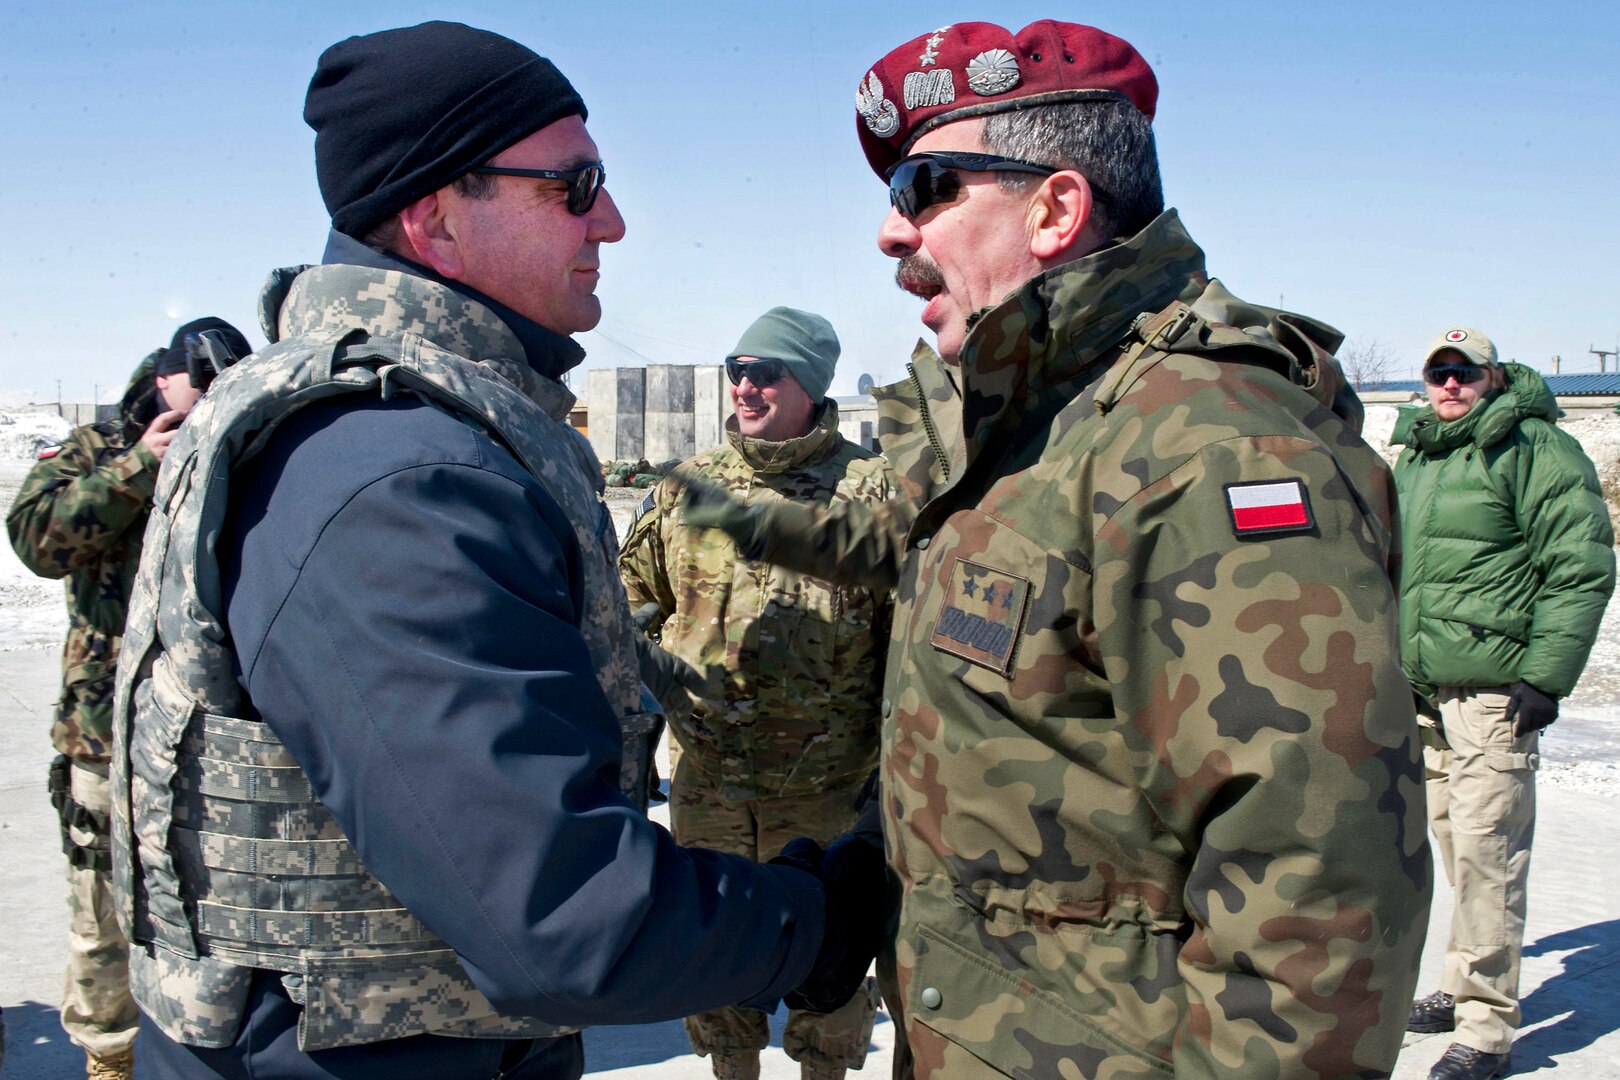 U.S. Deputy Defense Secretary Ashton B. Carter greets a Polish battle group commander on Forward Operating Base Ghazni, Afghanistan, Feb. 23, 2012. Carter is in Afghanistan meeting with troops and NATO members.